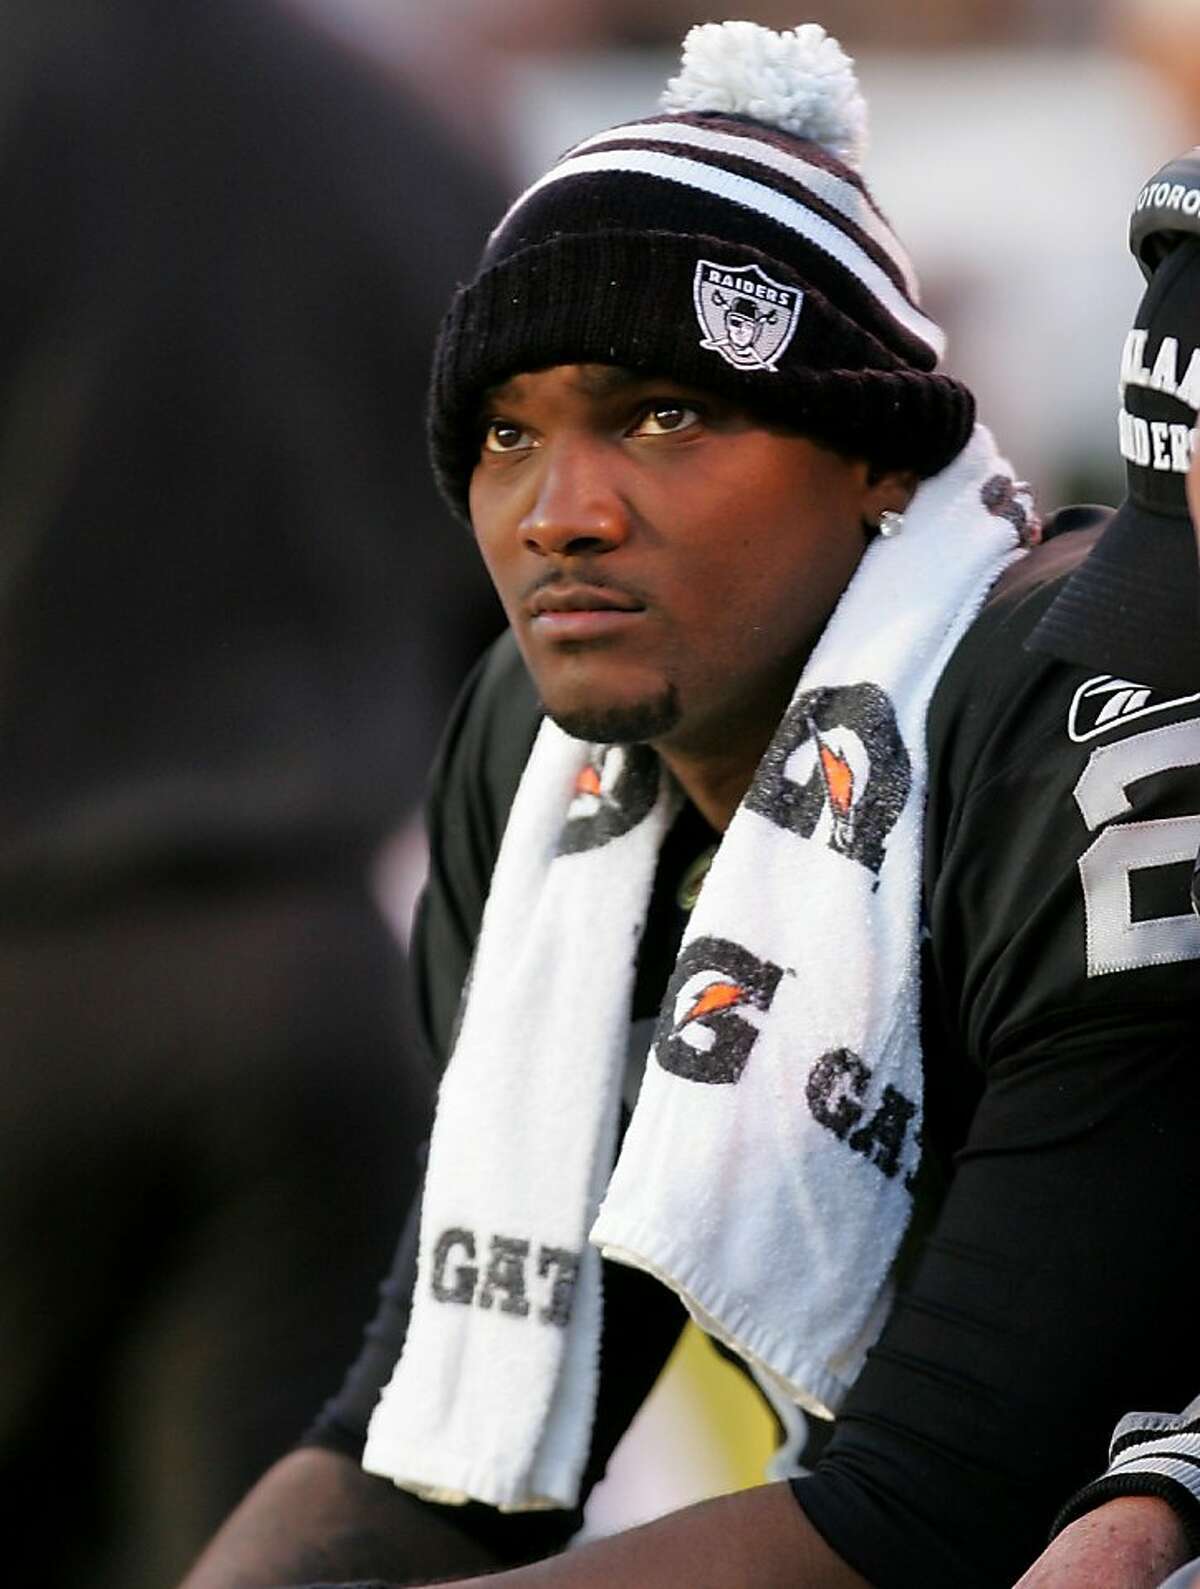 OAKLAND, CA - NOVEMBER 15: (FILE) JaMarcus Russell #2 of the Oakland Raiders sits on the bench after being taken out of their game against the Kansas City Chiefs at Oakland-Alameda County Coliseum on November 15, 2009 in Oakland, California. According to reports on May 6, 2010, the Raiders have released quarterback JaMarcus Russell, drafted overall number one in 2007. (Photo by Ezra Shaw/Getty Images) Ran on: 05-09-2010 JaMarcus Russell